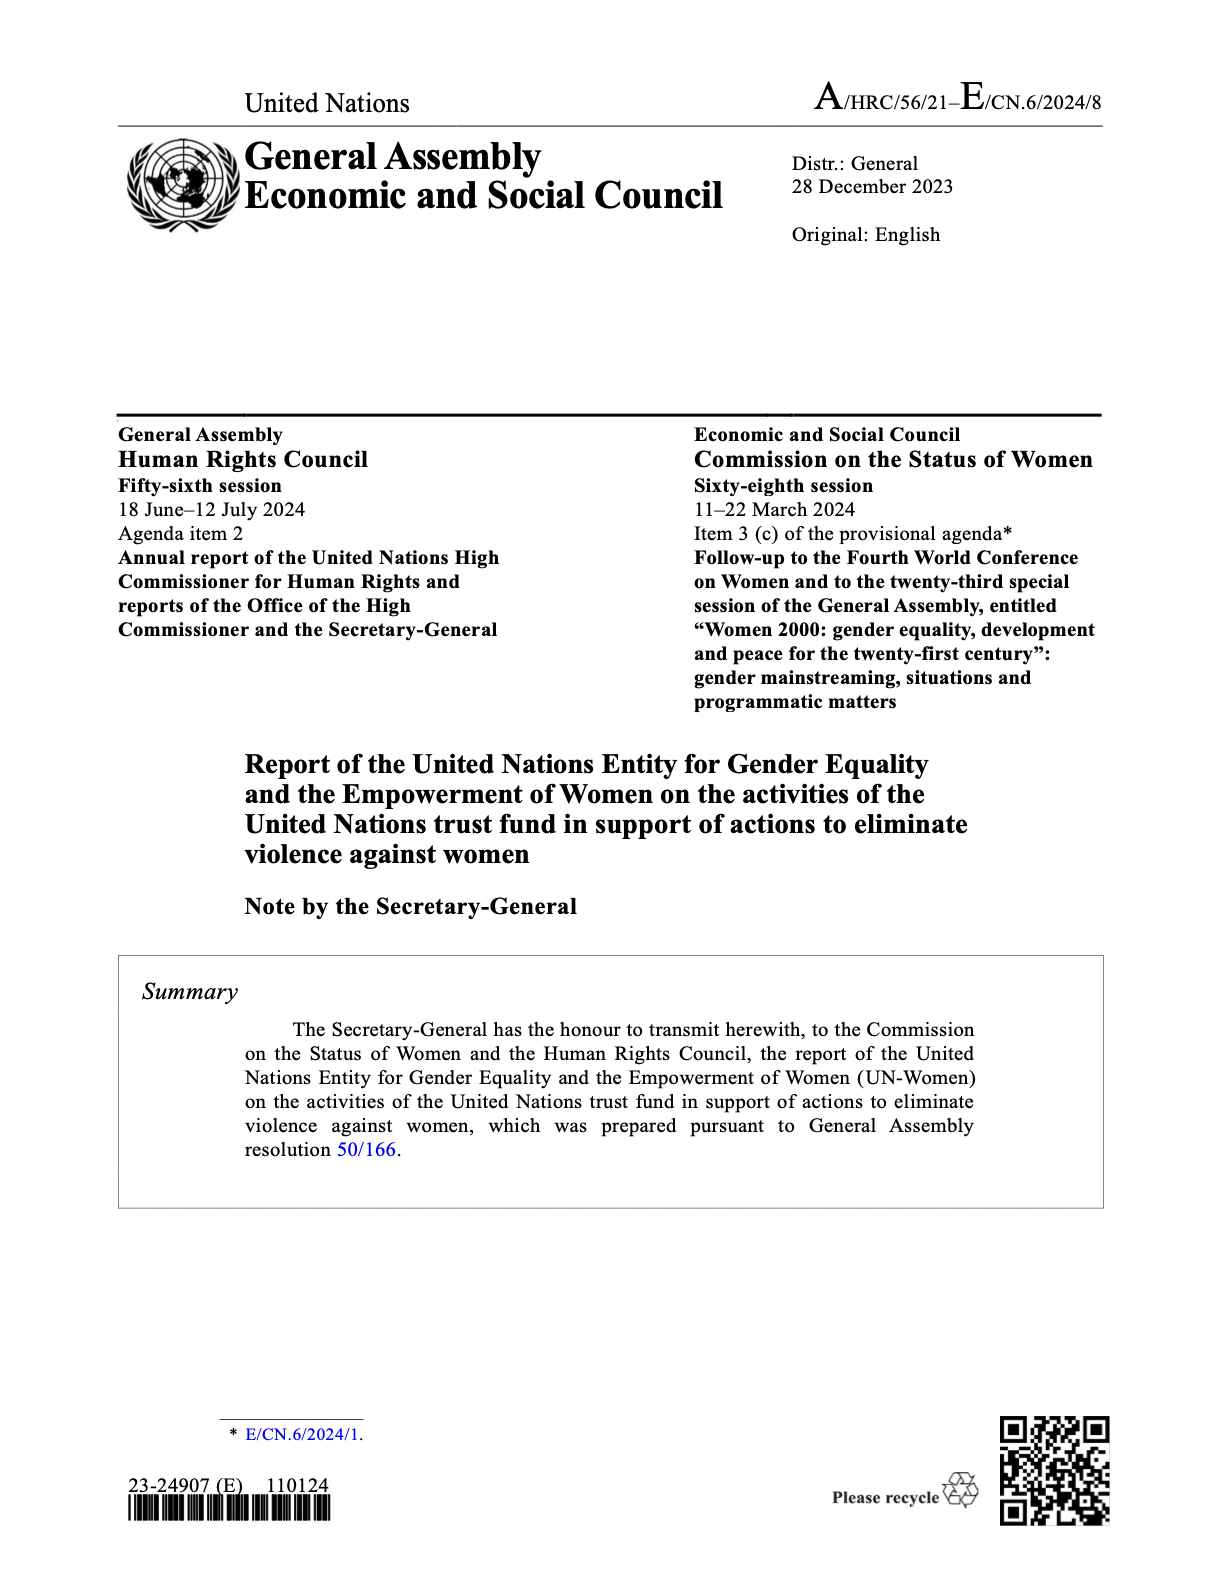 UN Trust Fund Report to the Commission on the Status of Women 2024